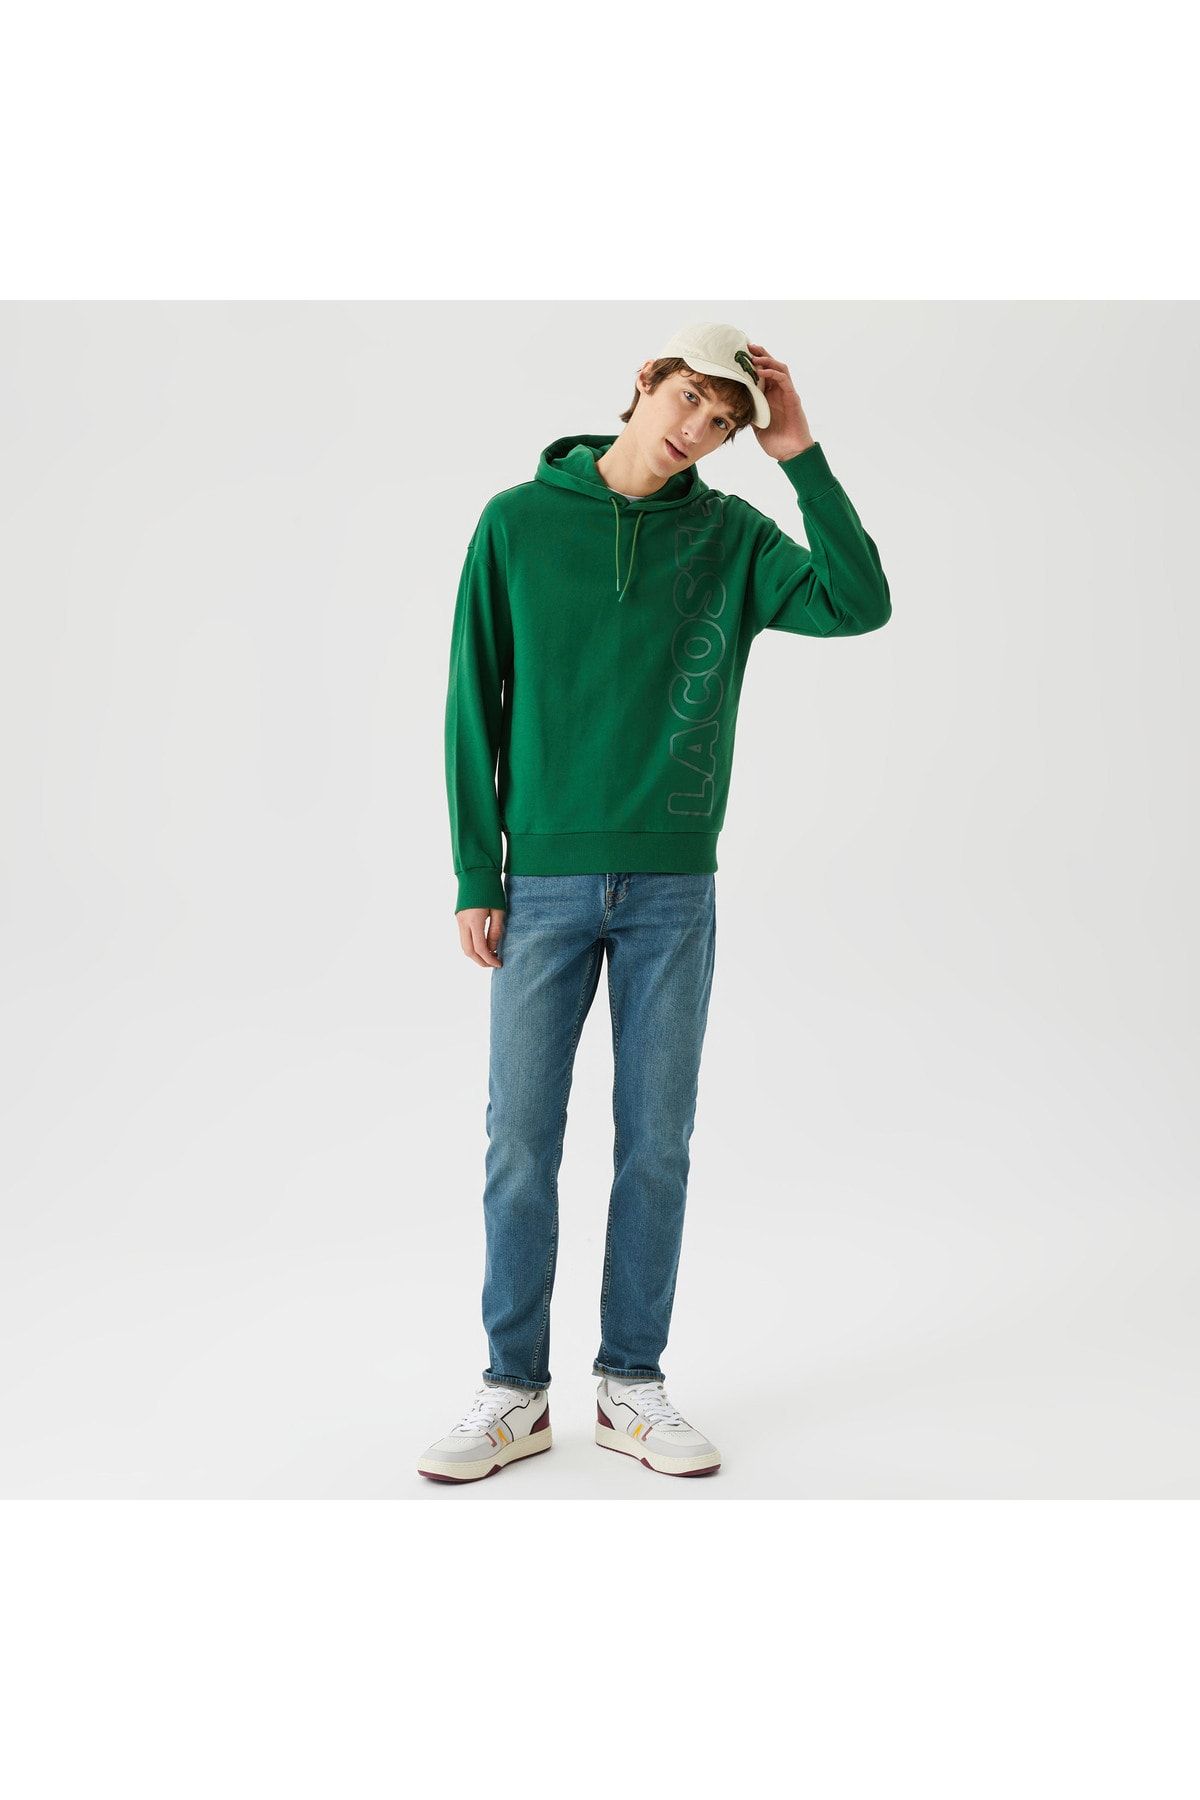 Lacoste Unisex Relax Fit Cooded Green پیراهن سبز